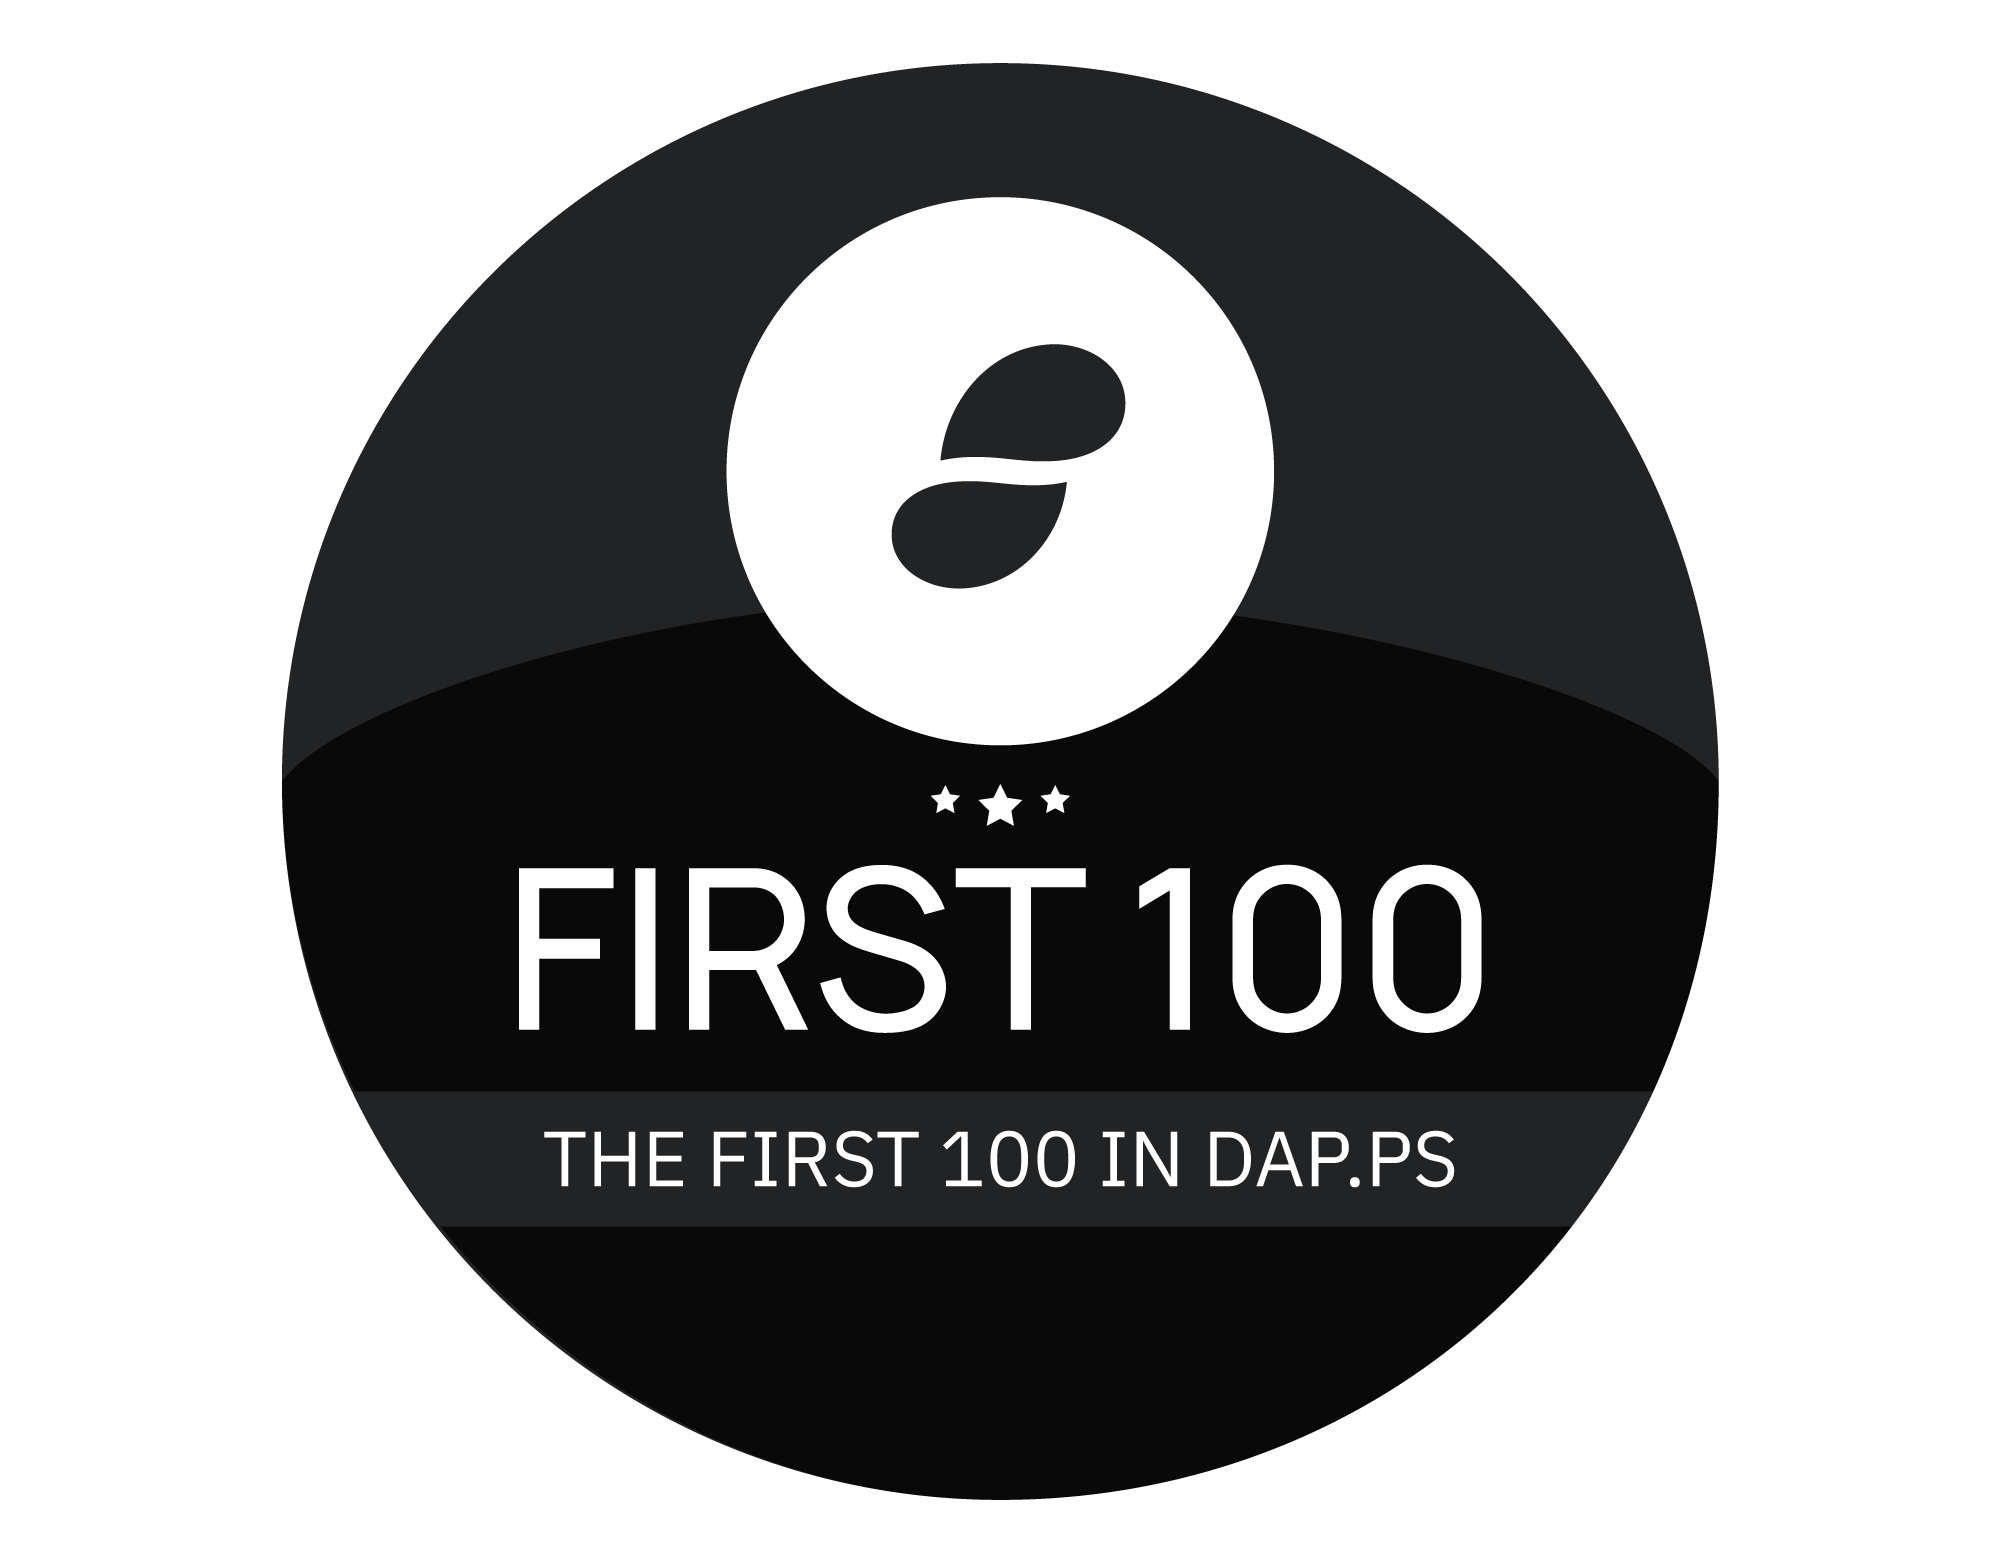 Introducing the Dapp Integration Center – Be one of the first 100 Dapps!